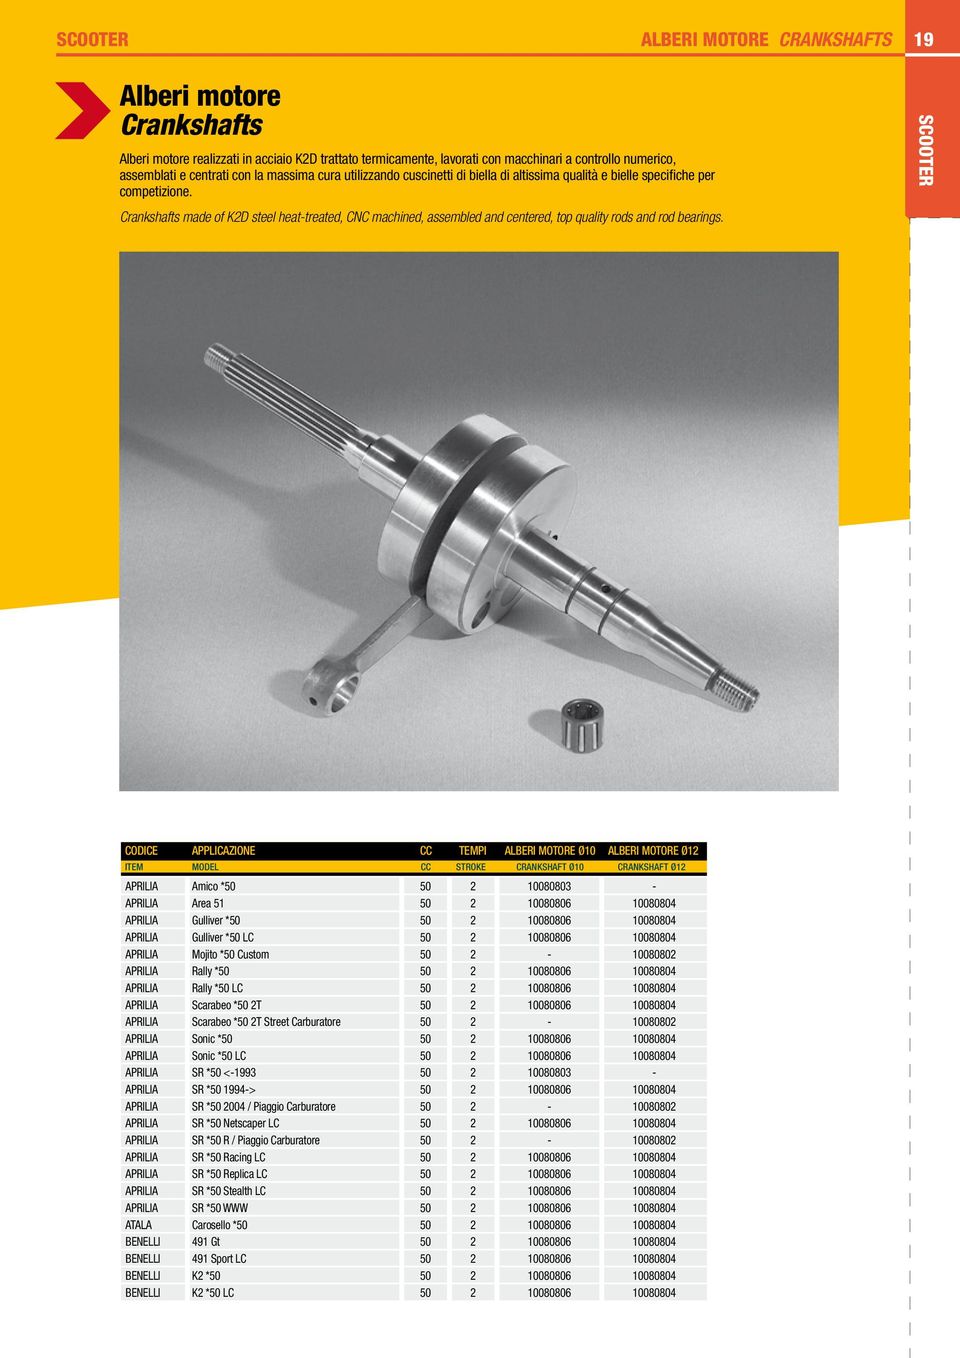 Crankshafts made of K2D steel heat-treated, CNC machined, assembled and centered, top quality rods and rod bearings.